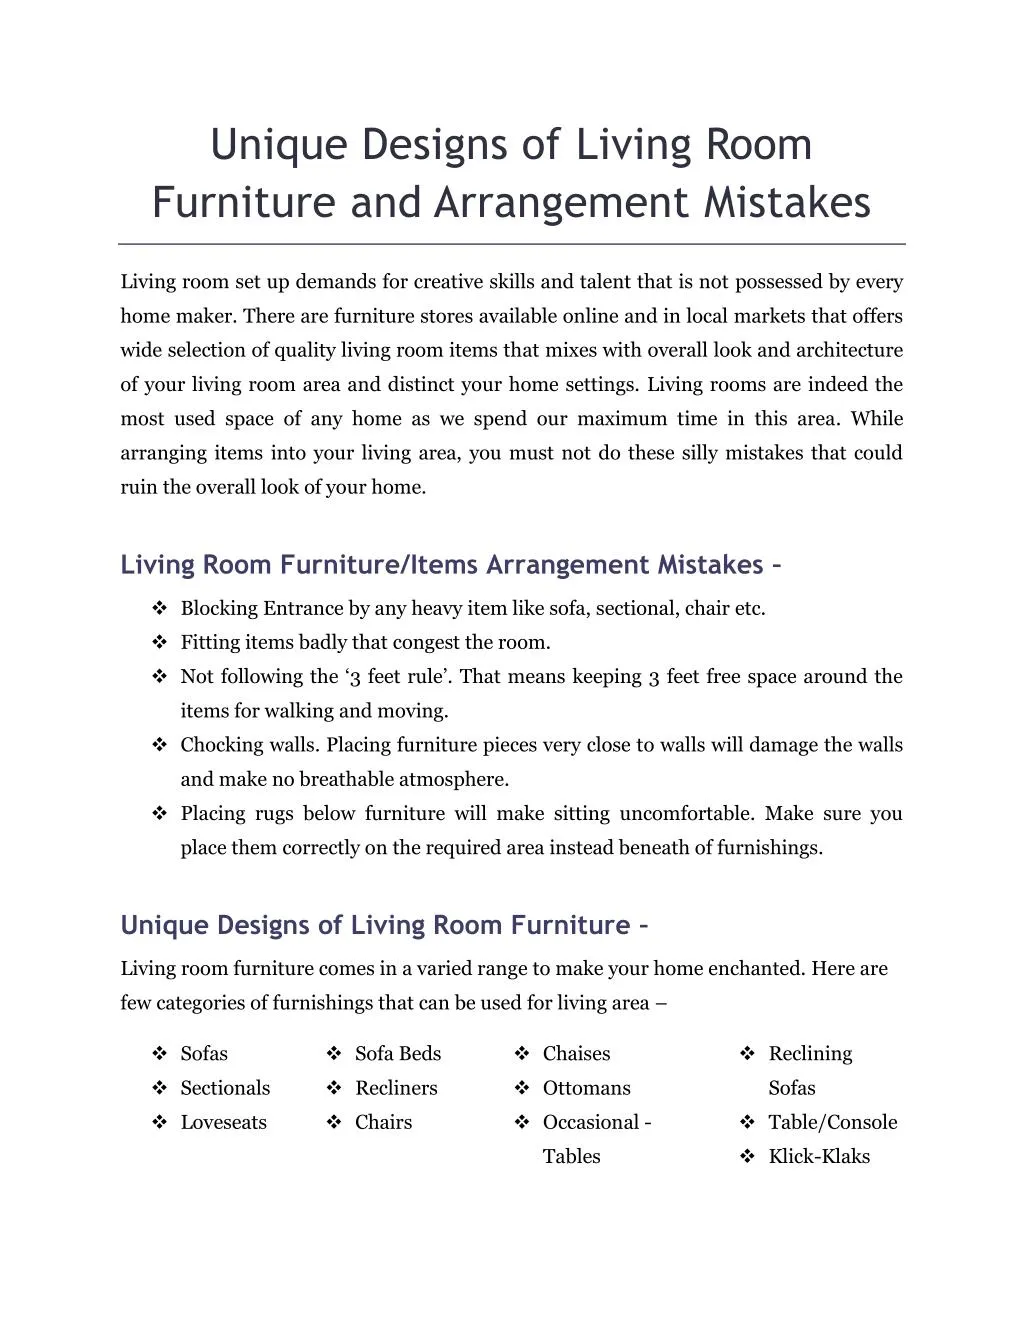 PPT - Unique Designs of Living Room Furniture and Arrangement Mistakes ...